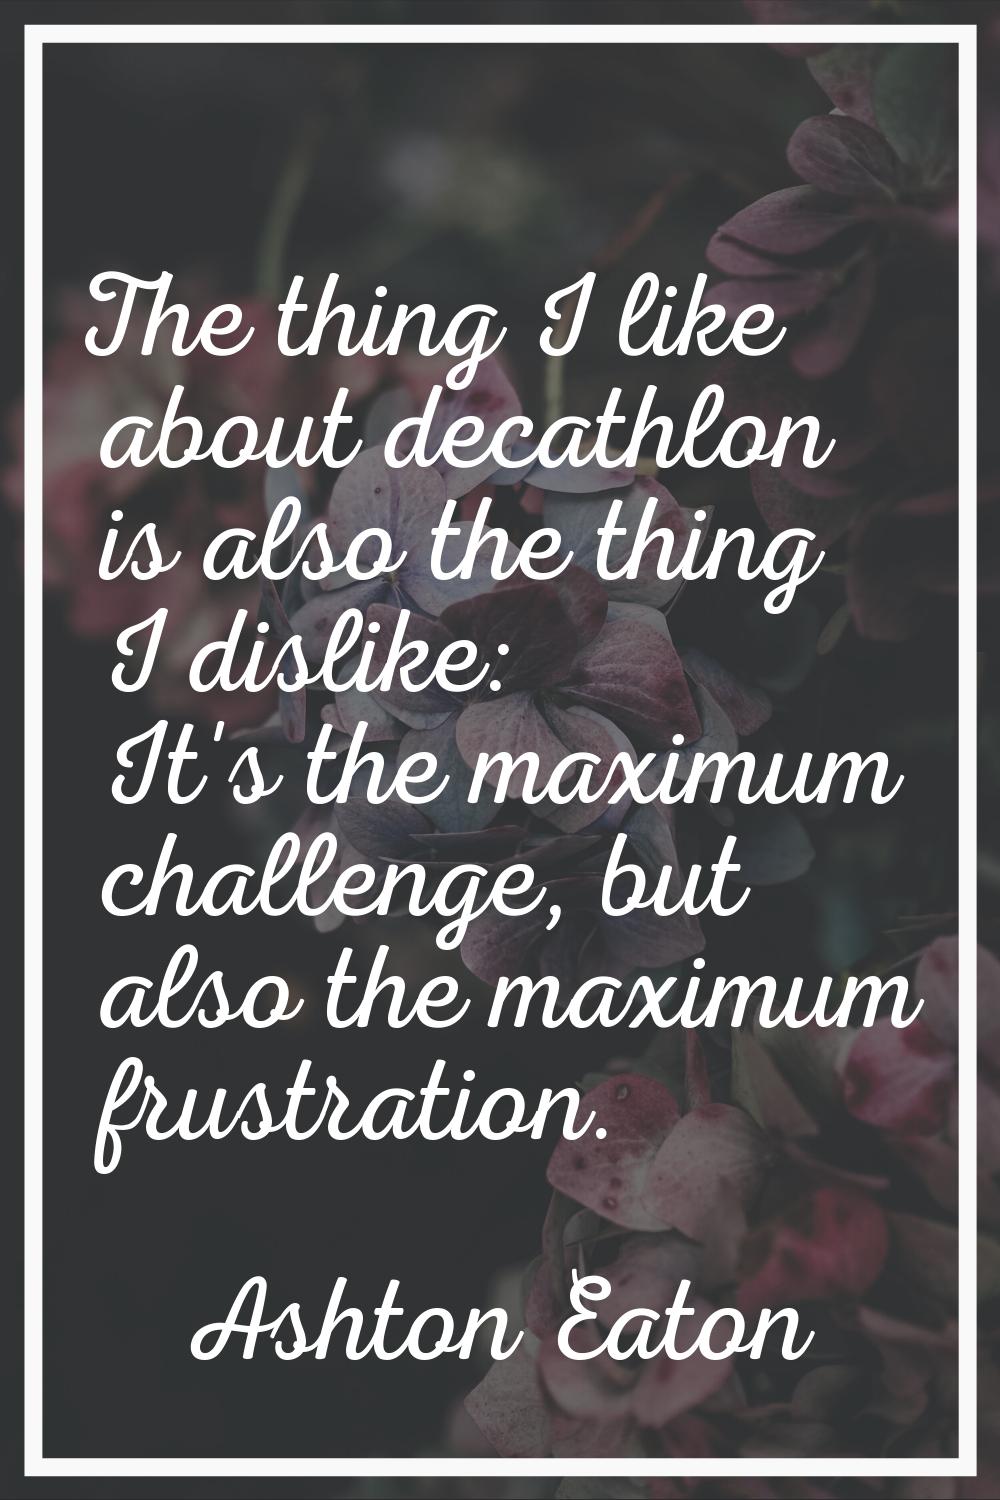 The thing I like about decathlon is also the thing I dislike: It's the maximum challenge, but also 